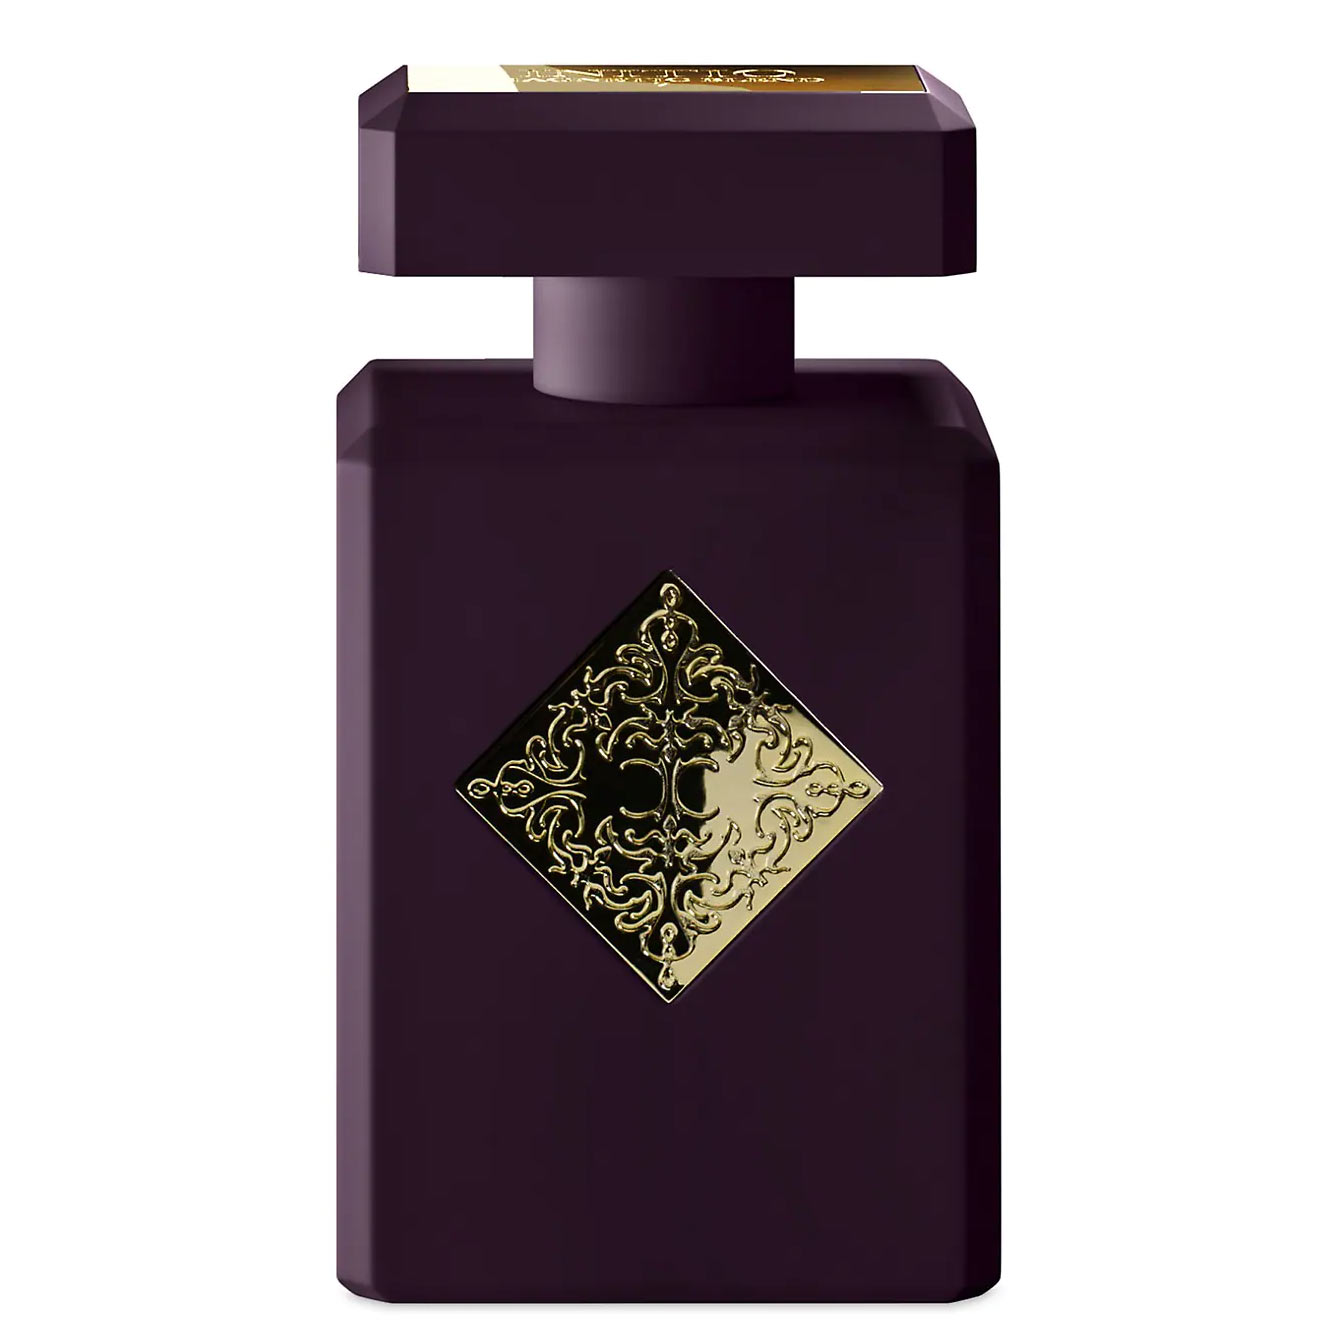 Psychedelic Love Initio Parfums Image